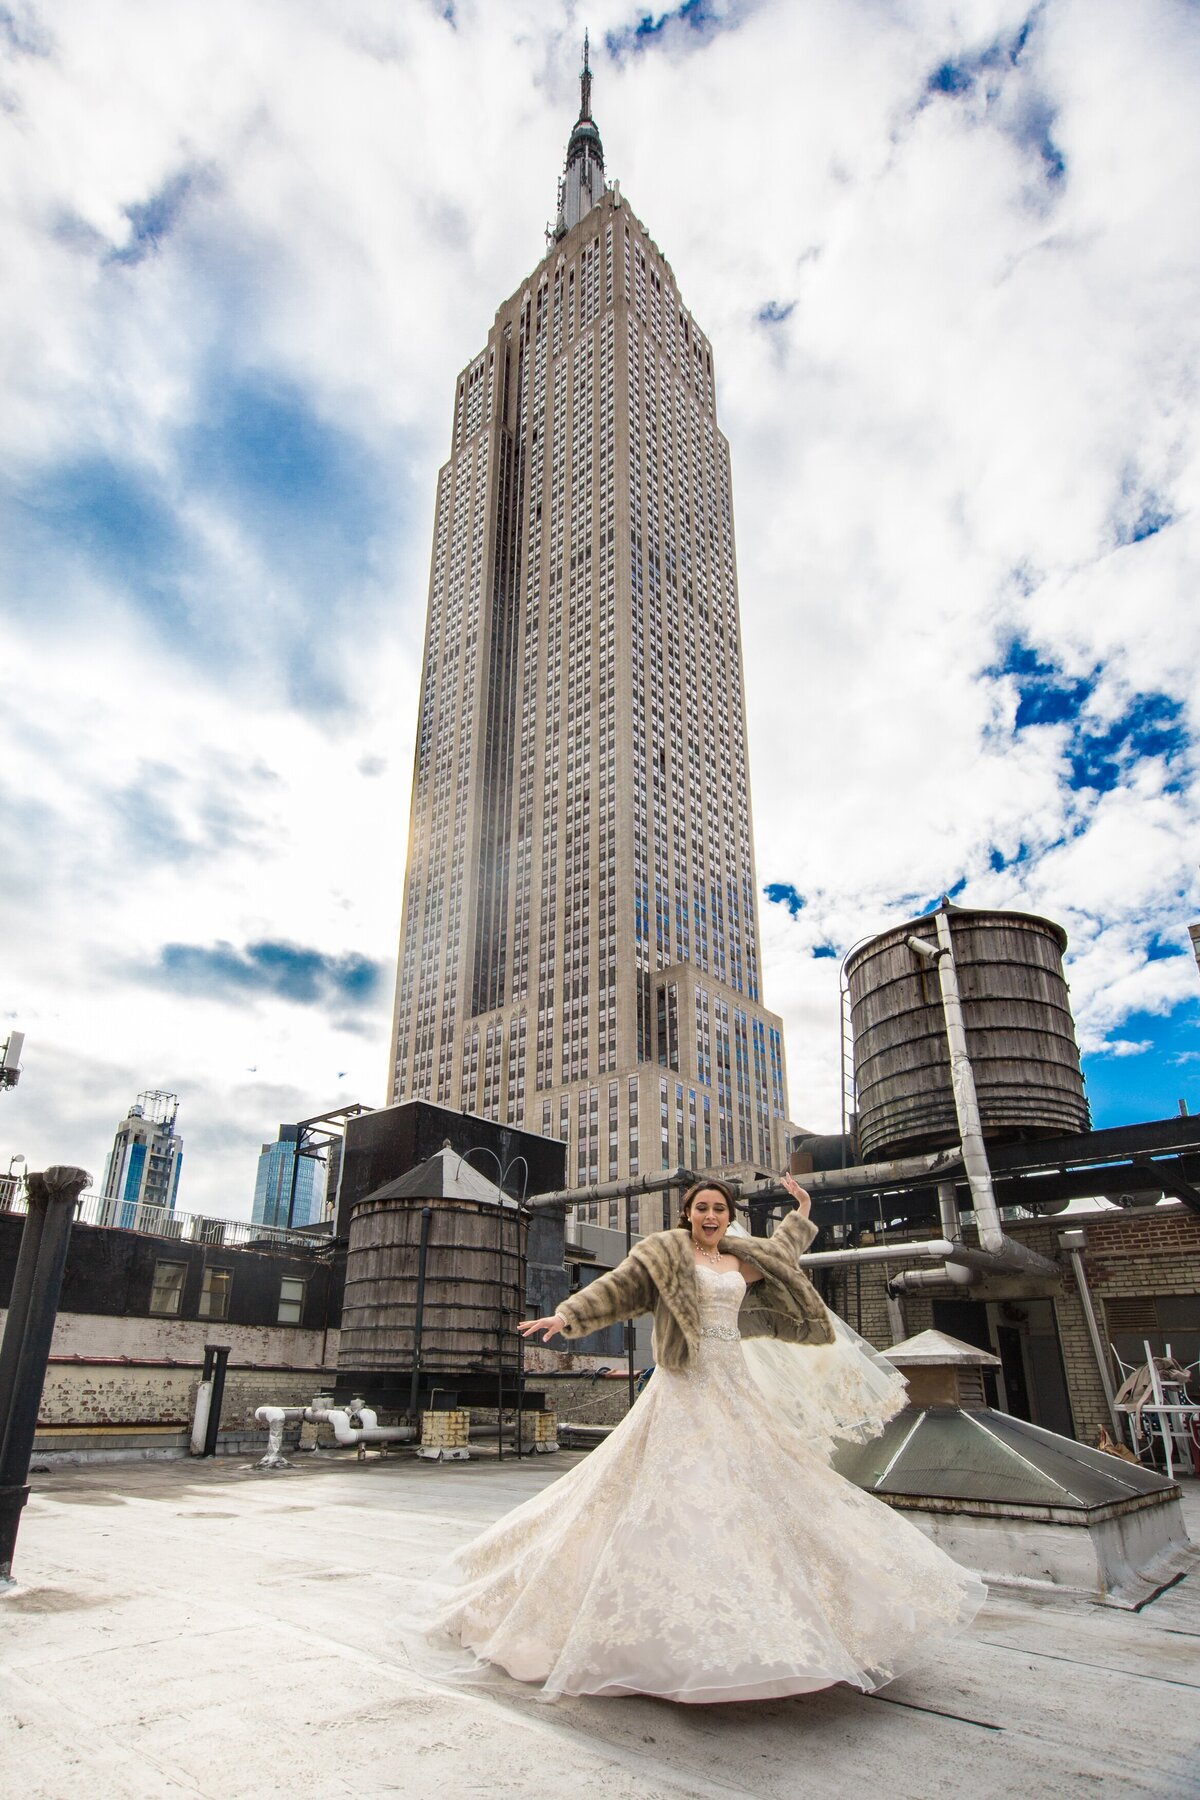 A bride dancing on a rooftop.